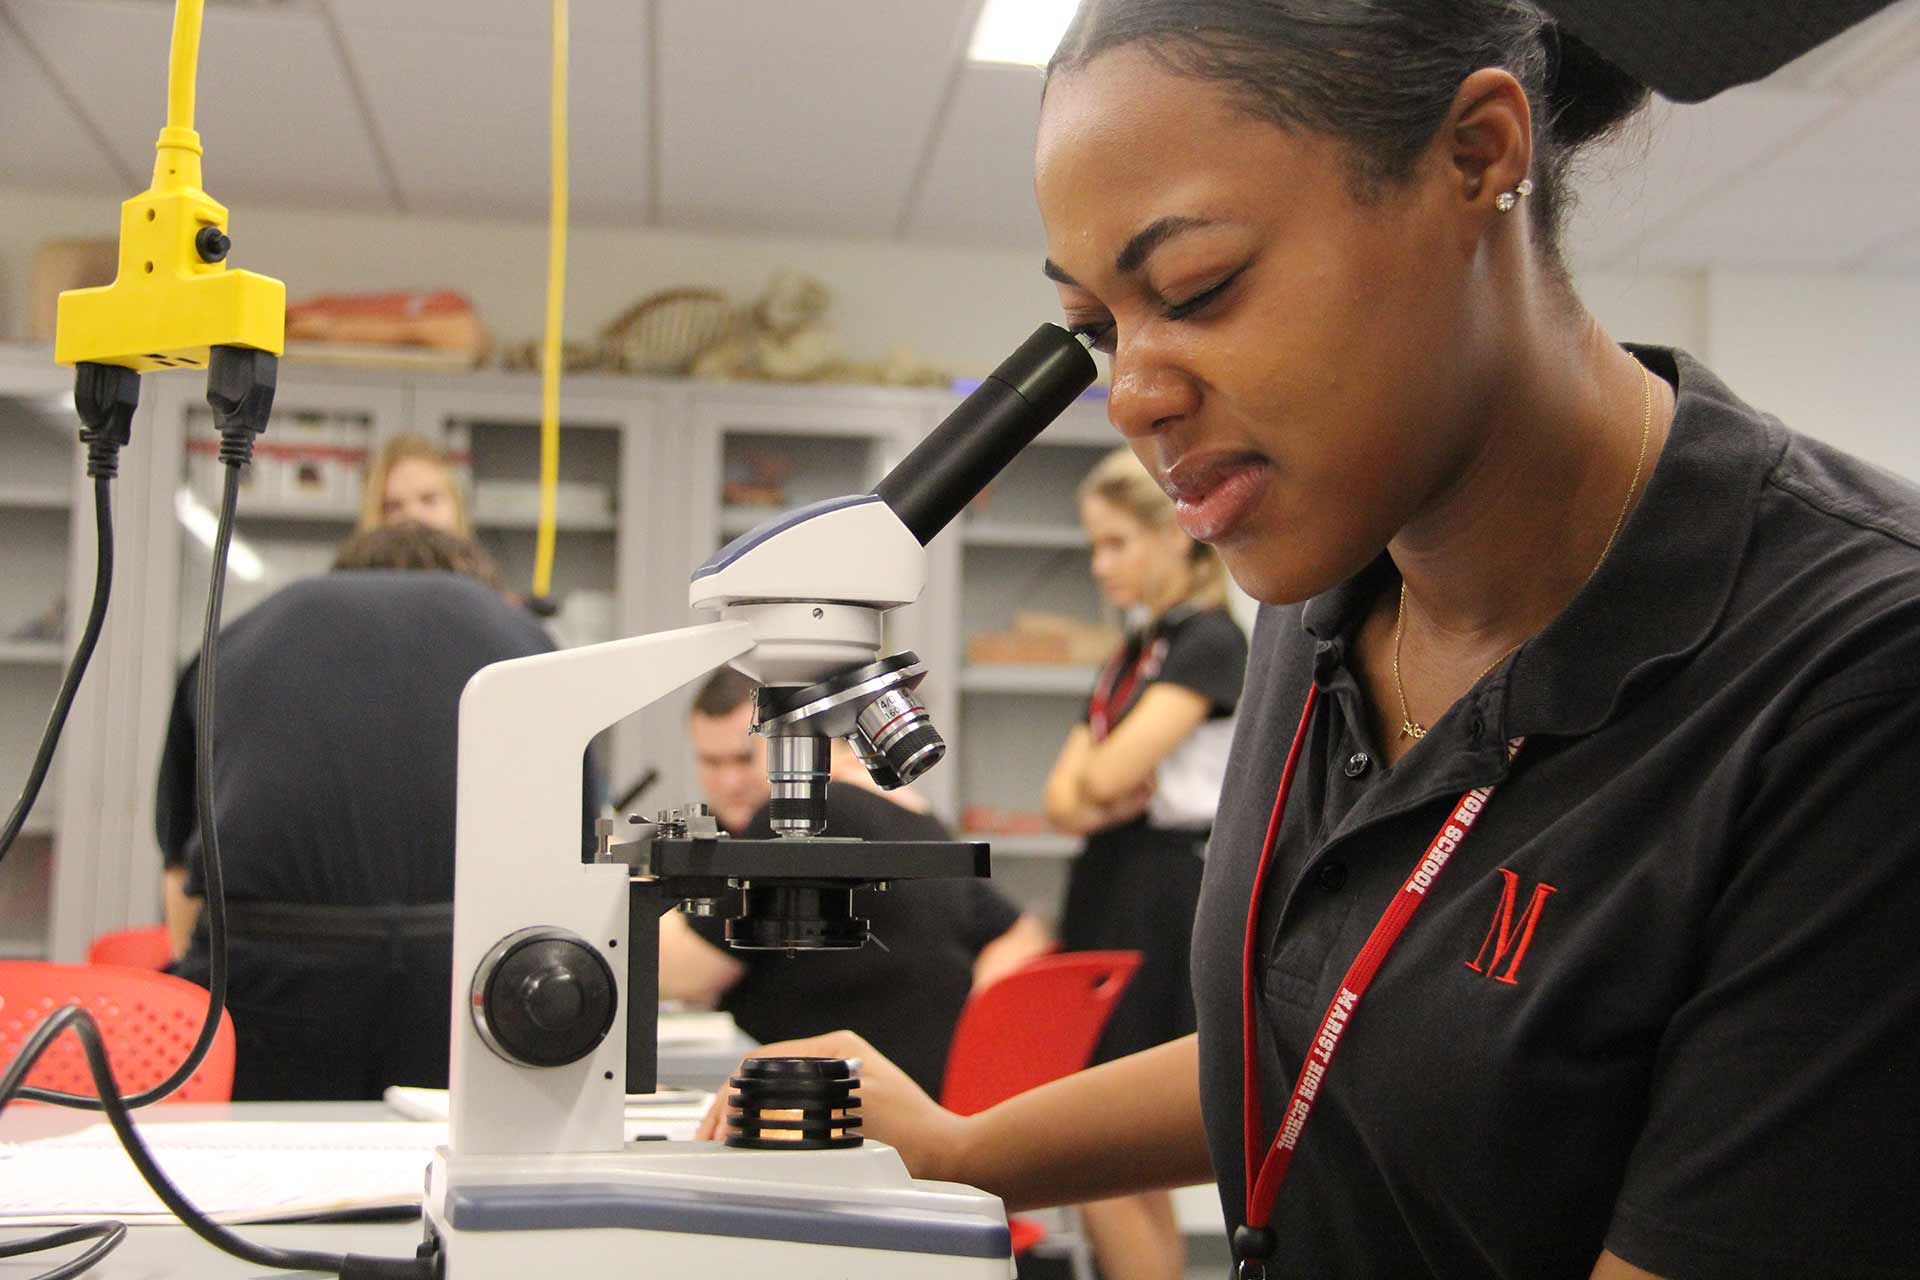 faith-in-the-future-campaign-student-looking-through-microscope